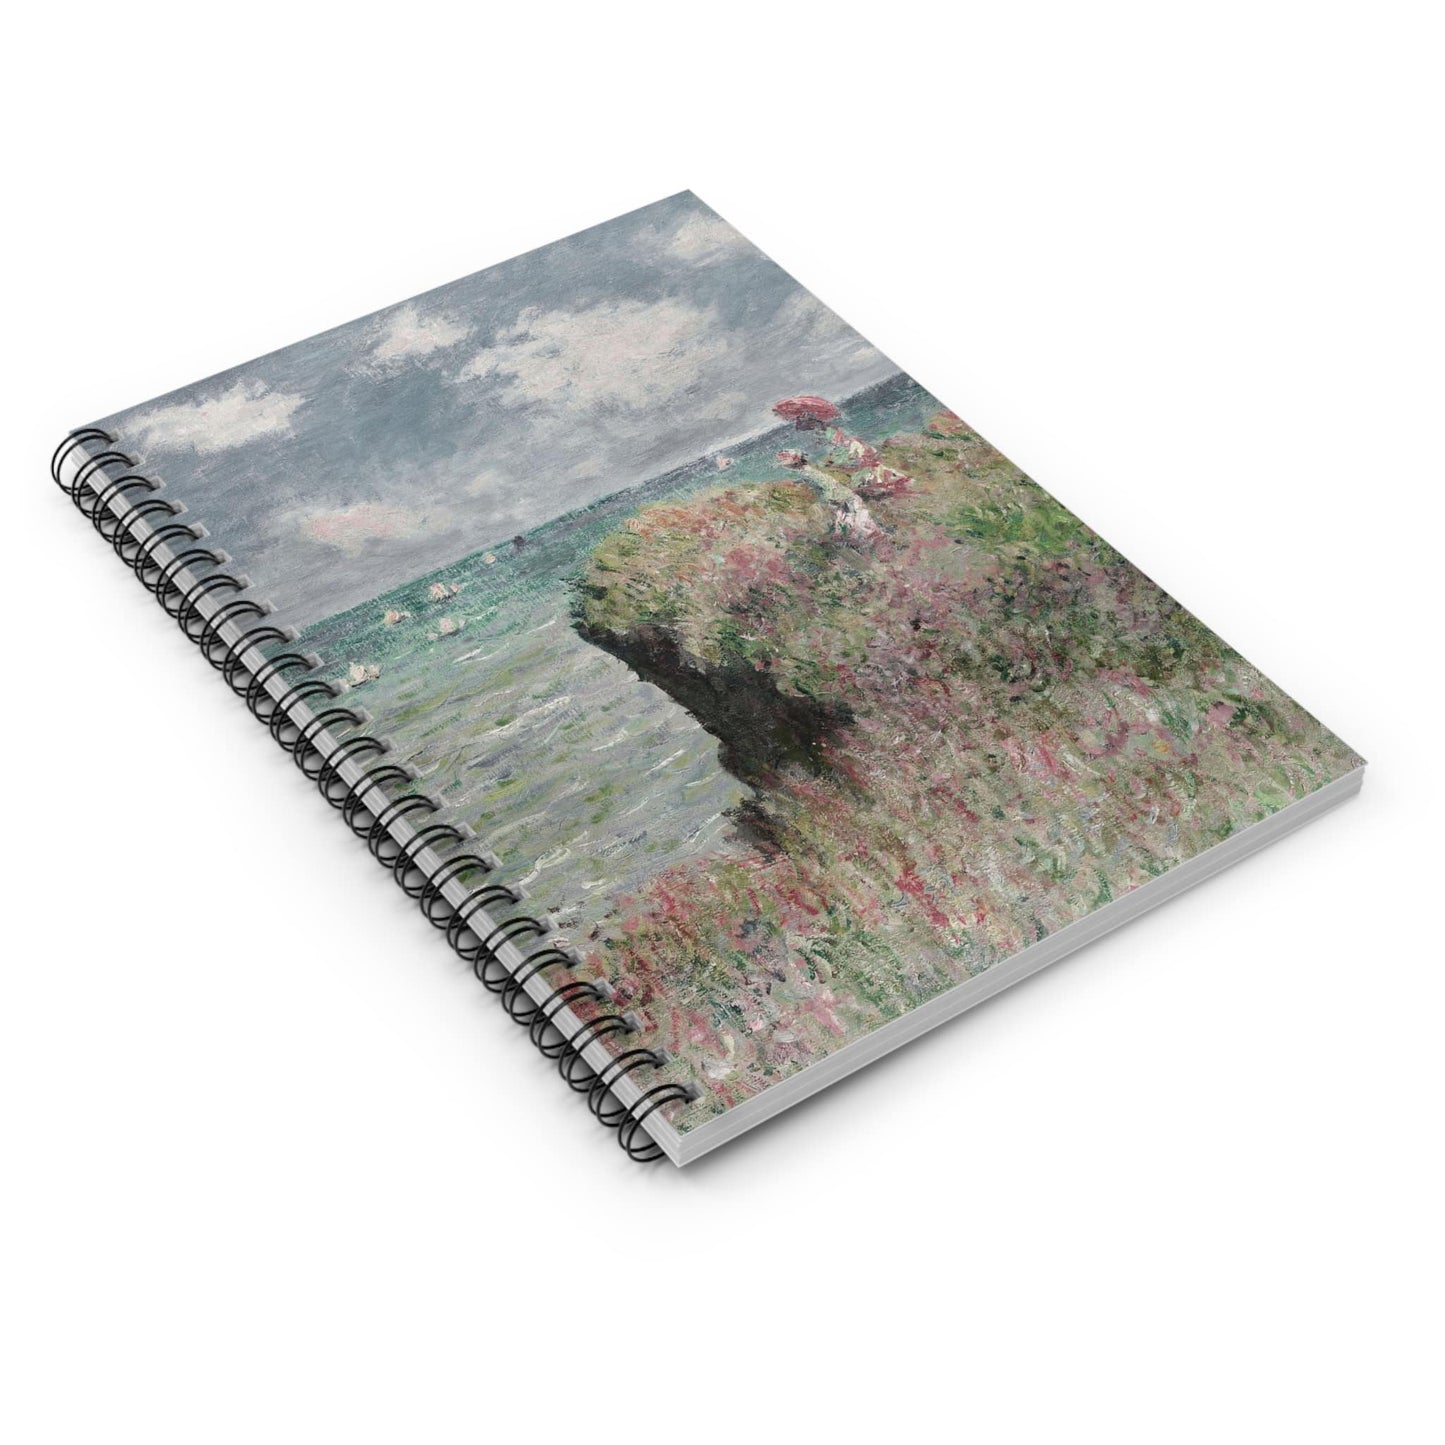 Summer Seascape Spiral Notebook Laying Flat on White Surface